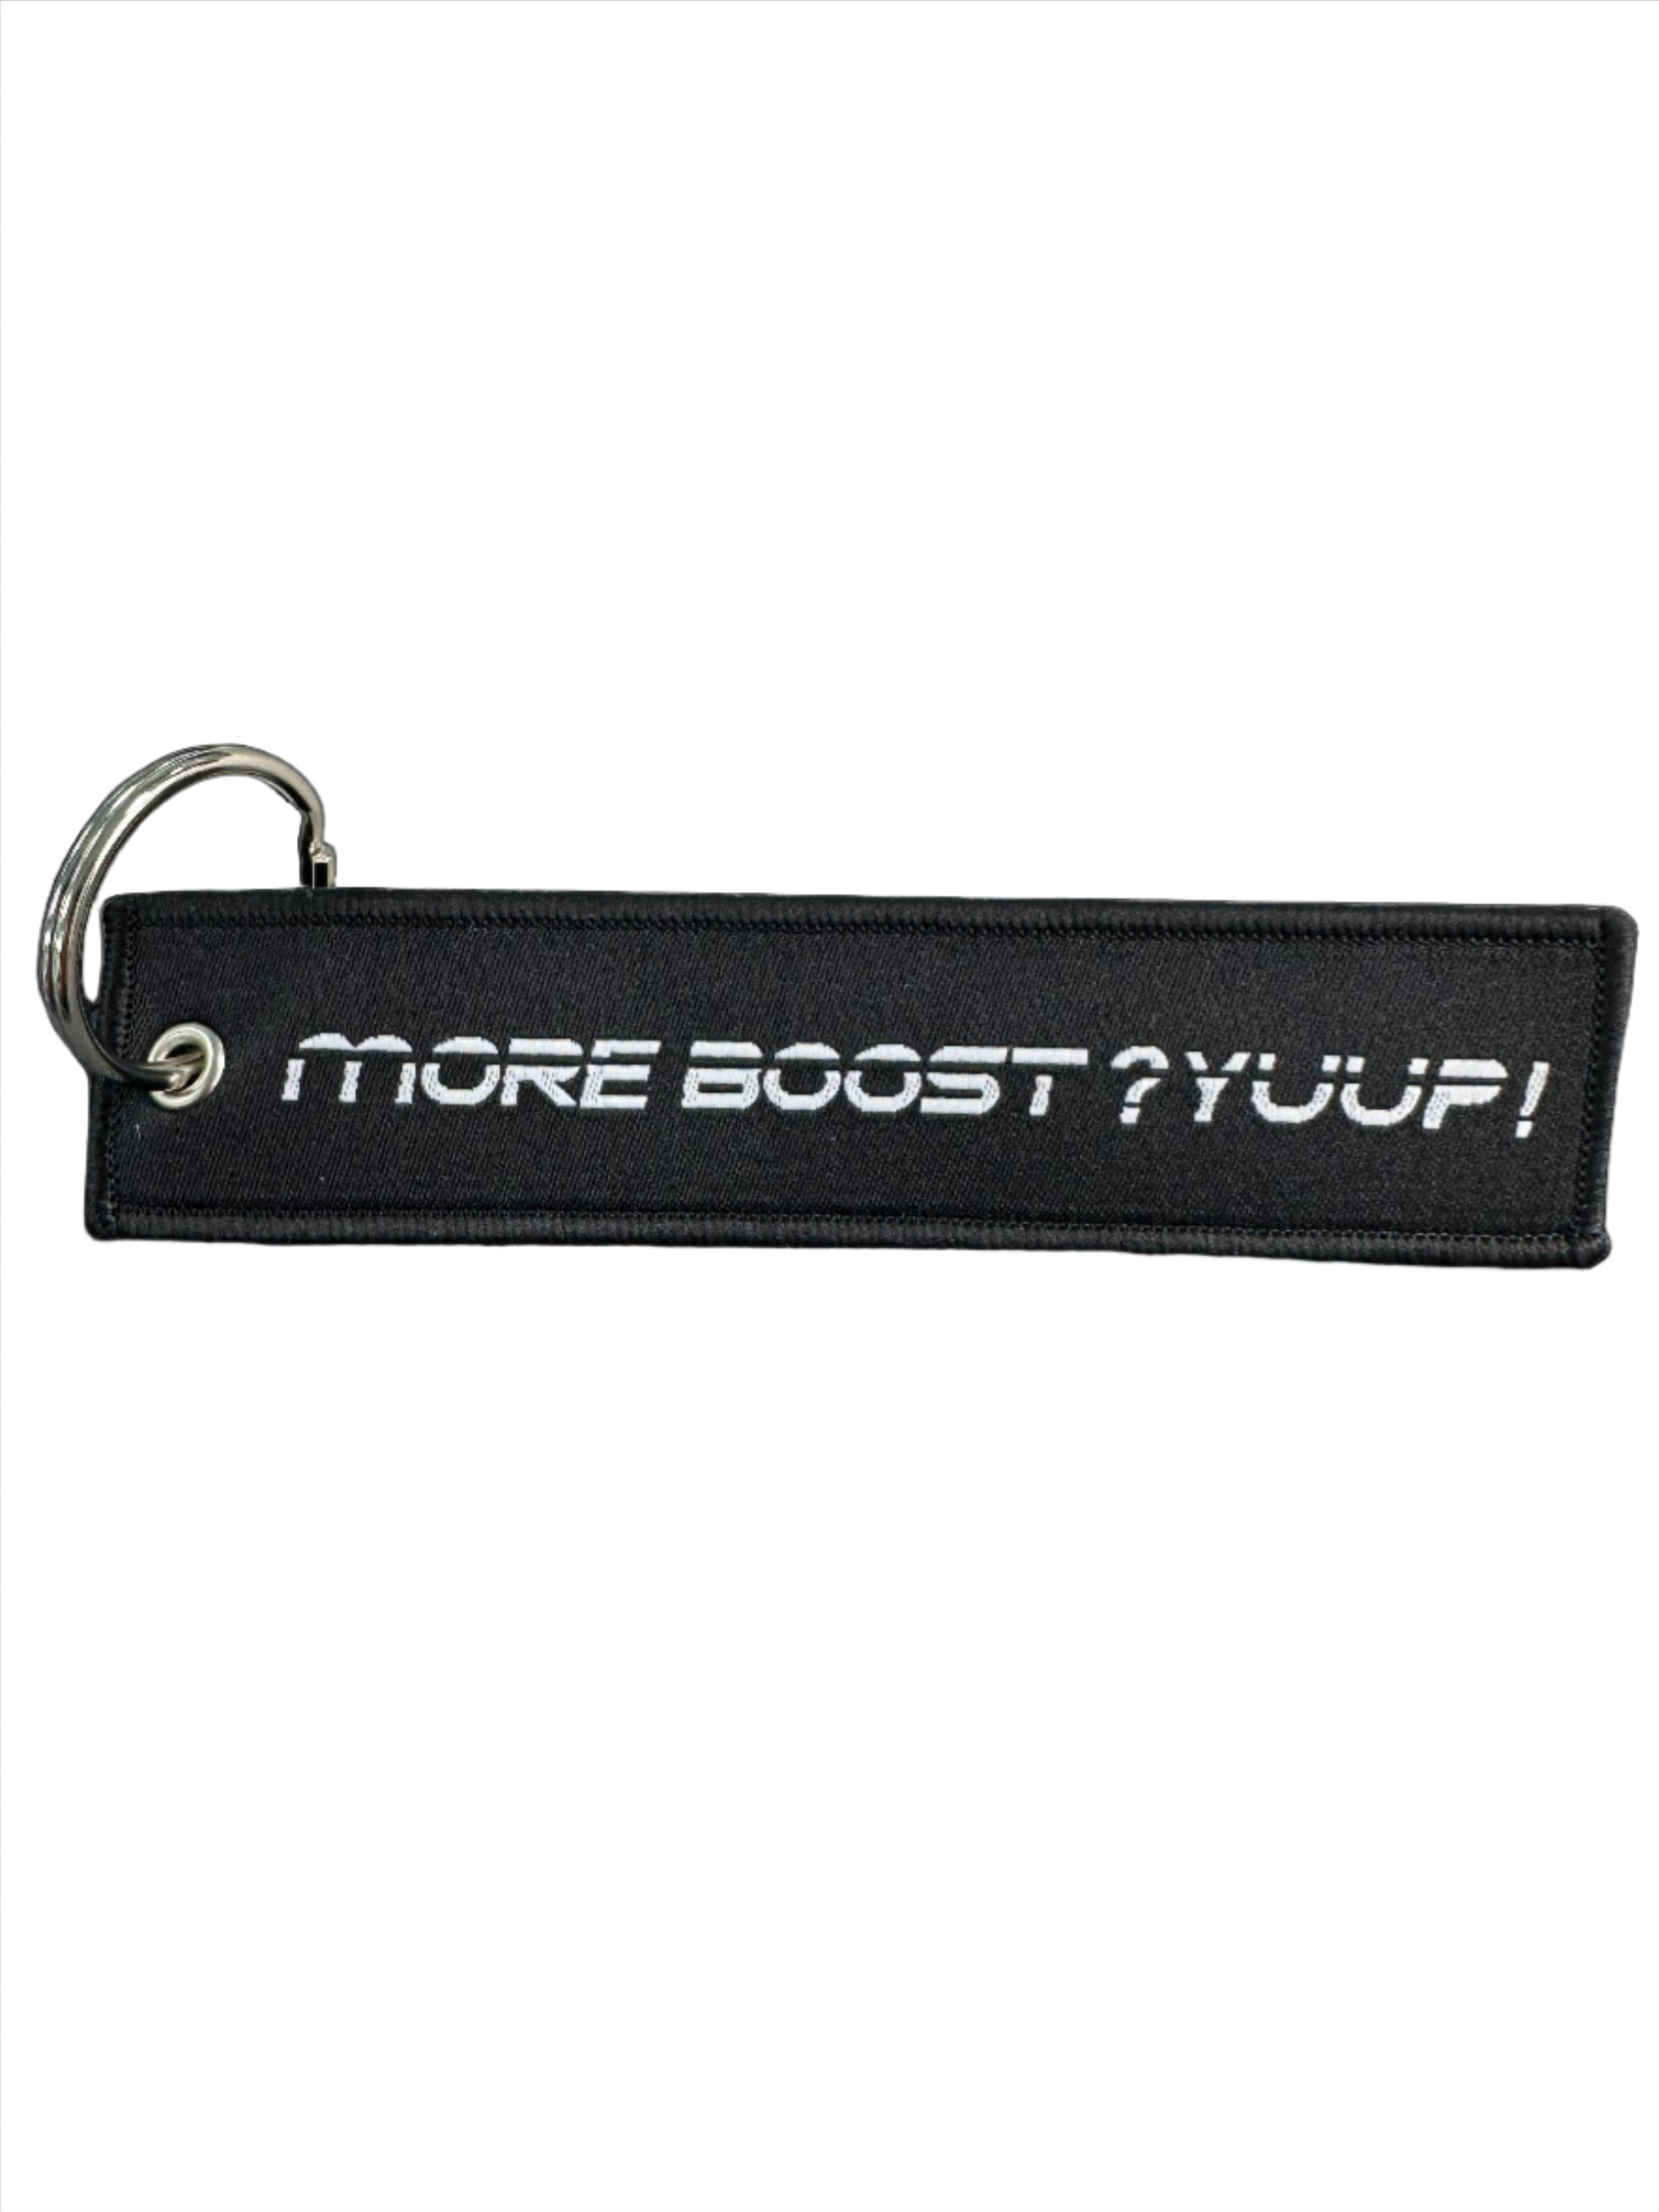 More boost? Yuup! Key Tag LIMITED